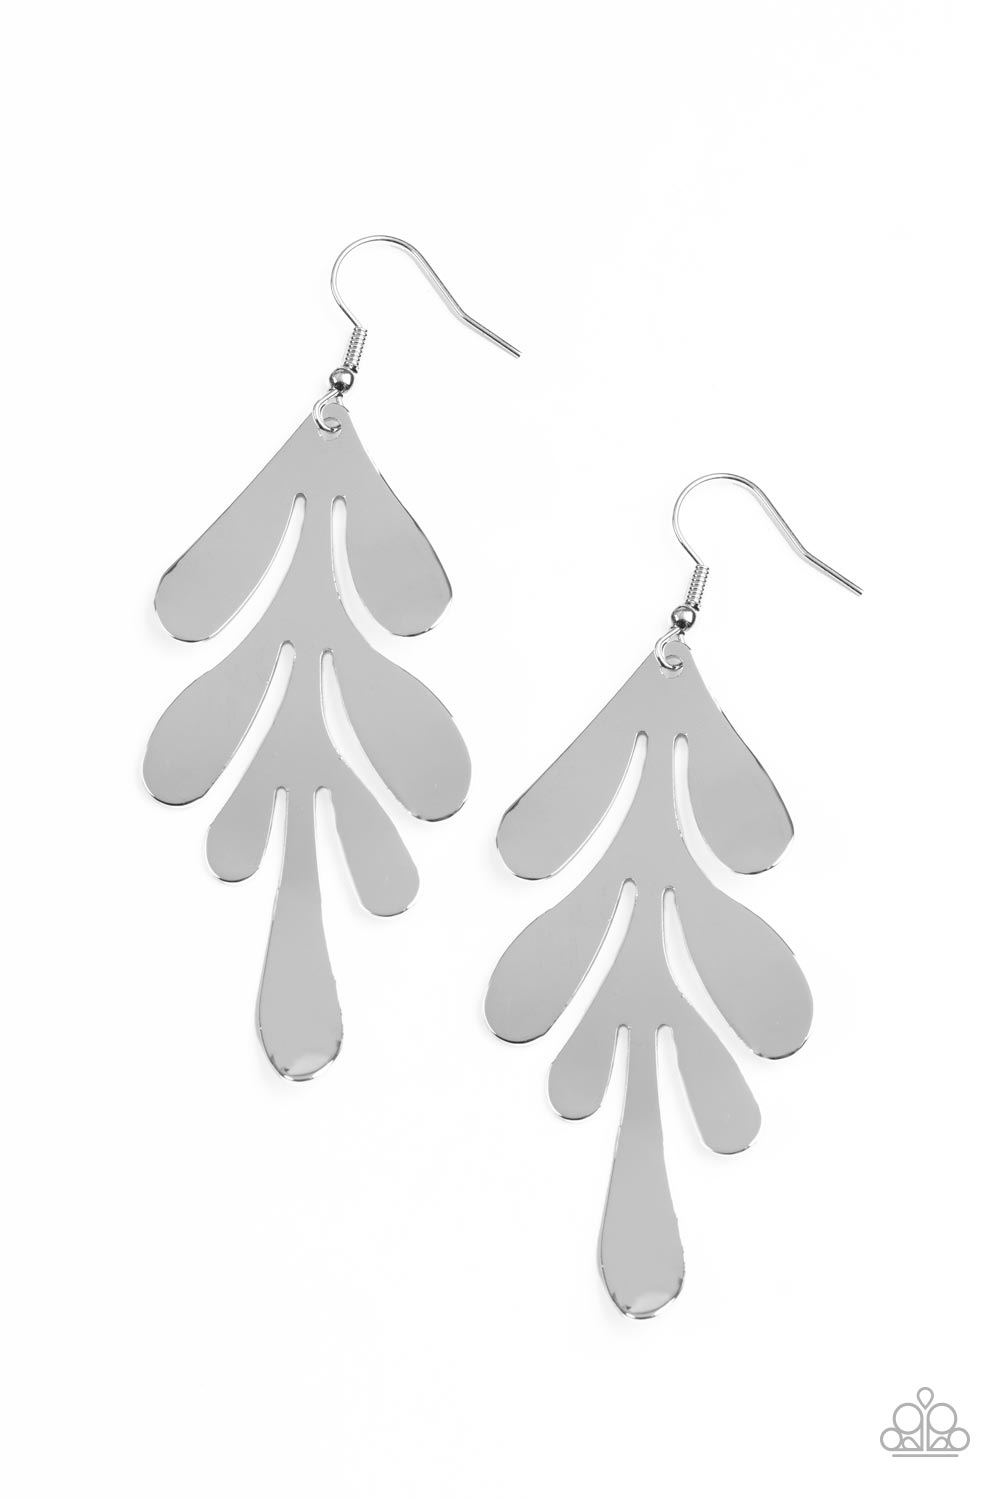 Paparazzi Accessories - A FROND Farewell #E644 Peg - Silver Earrings